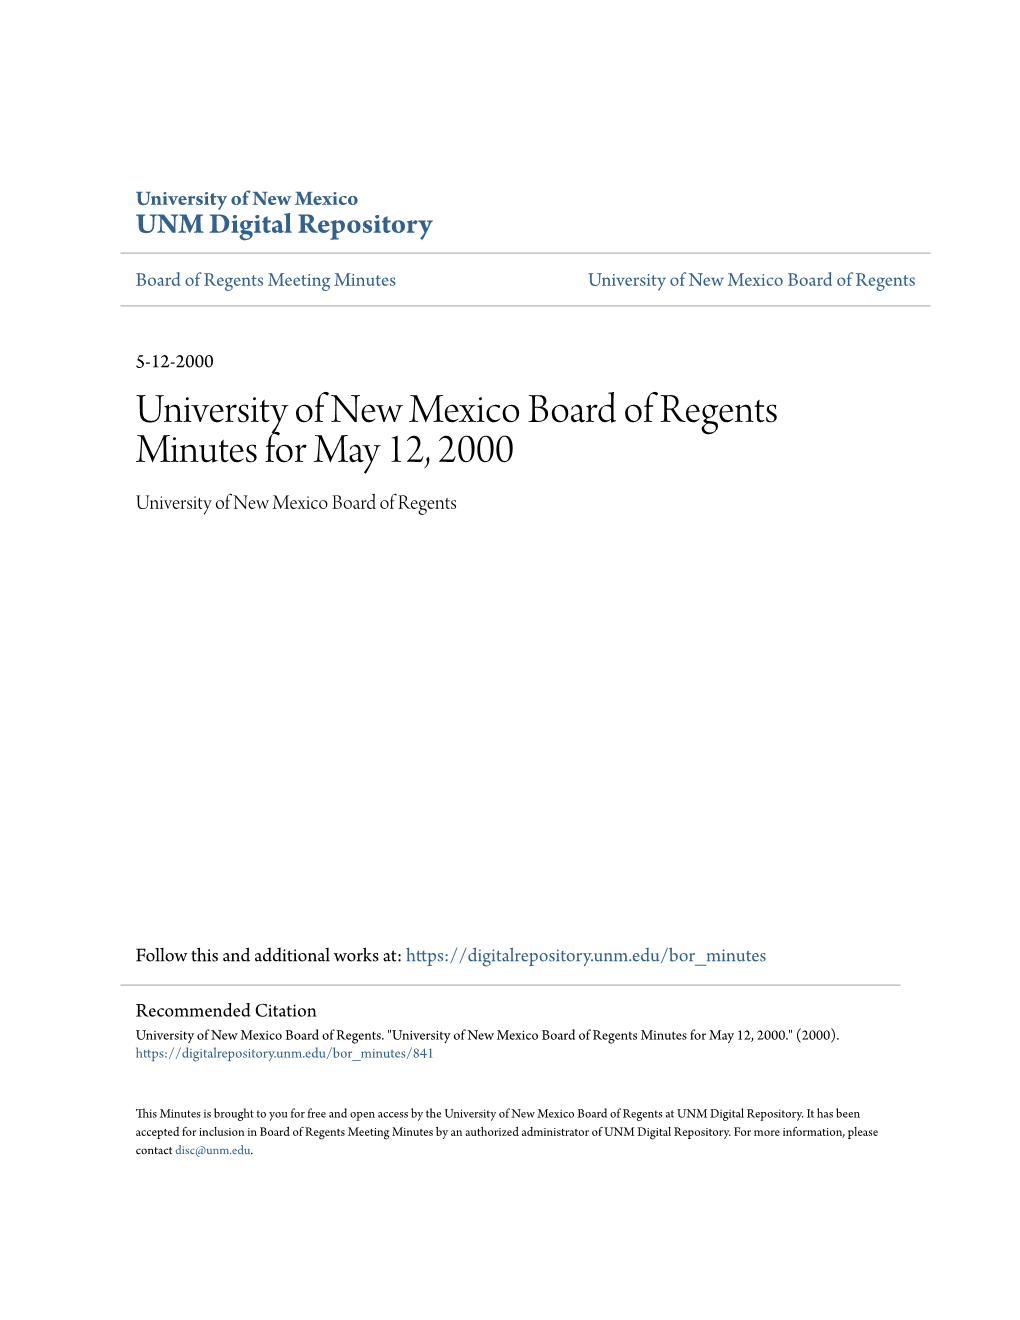 University of New Mexico Board of Regents Minutes for May 12, 2000 University of New Mexico Board of Regents